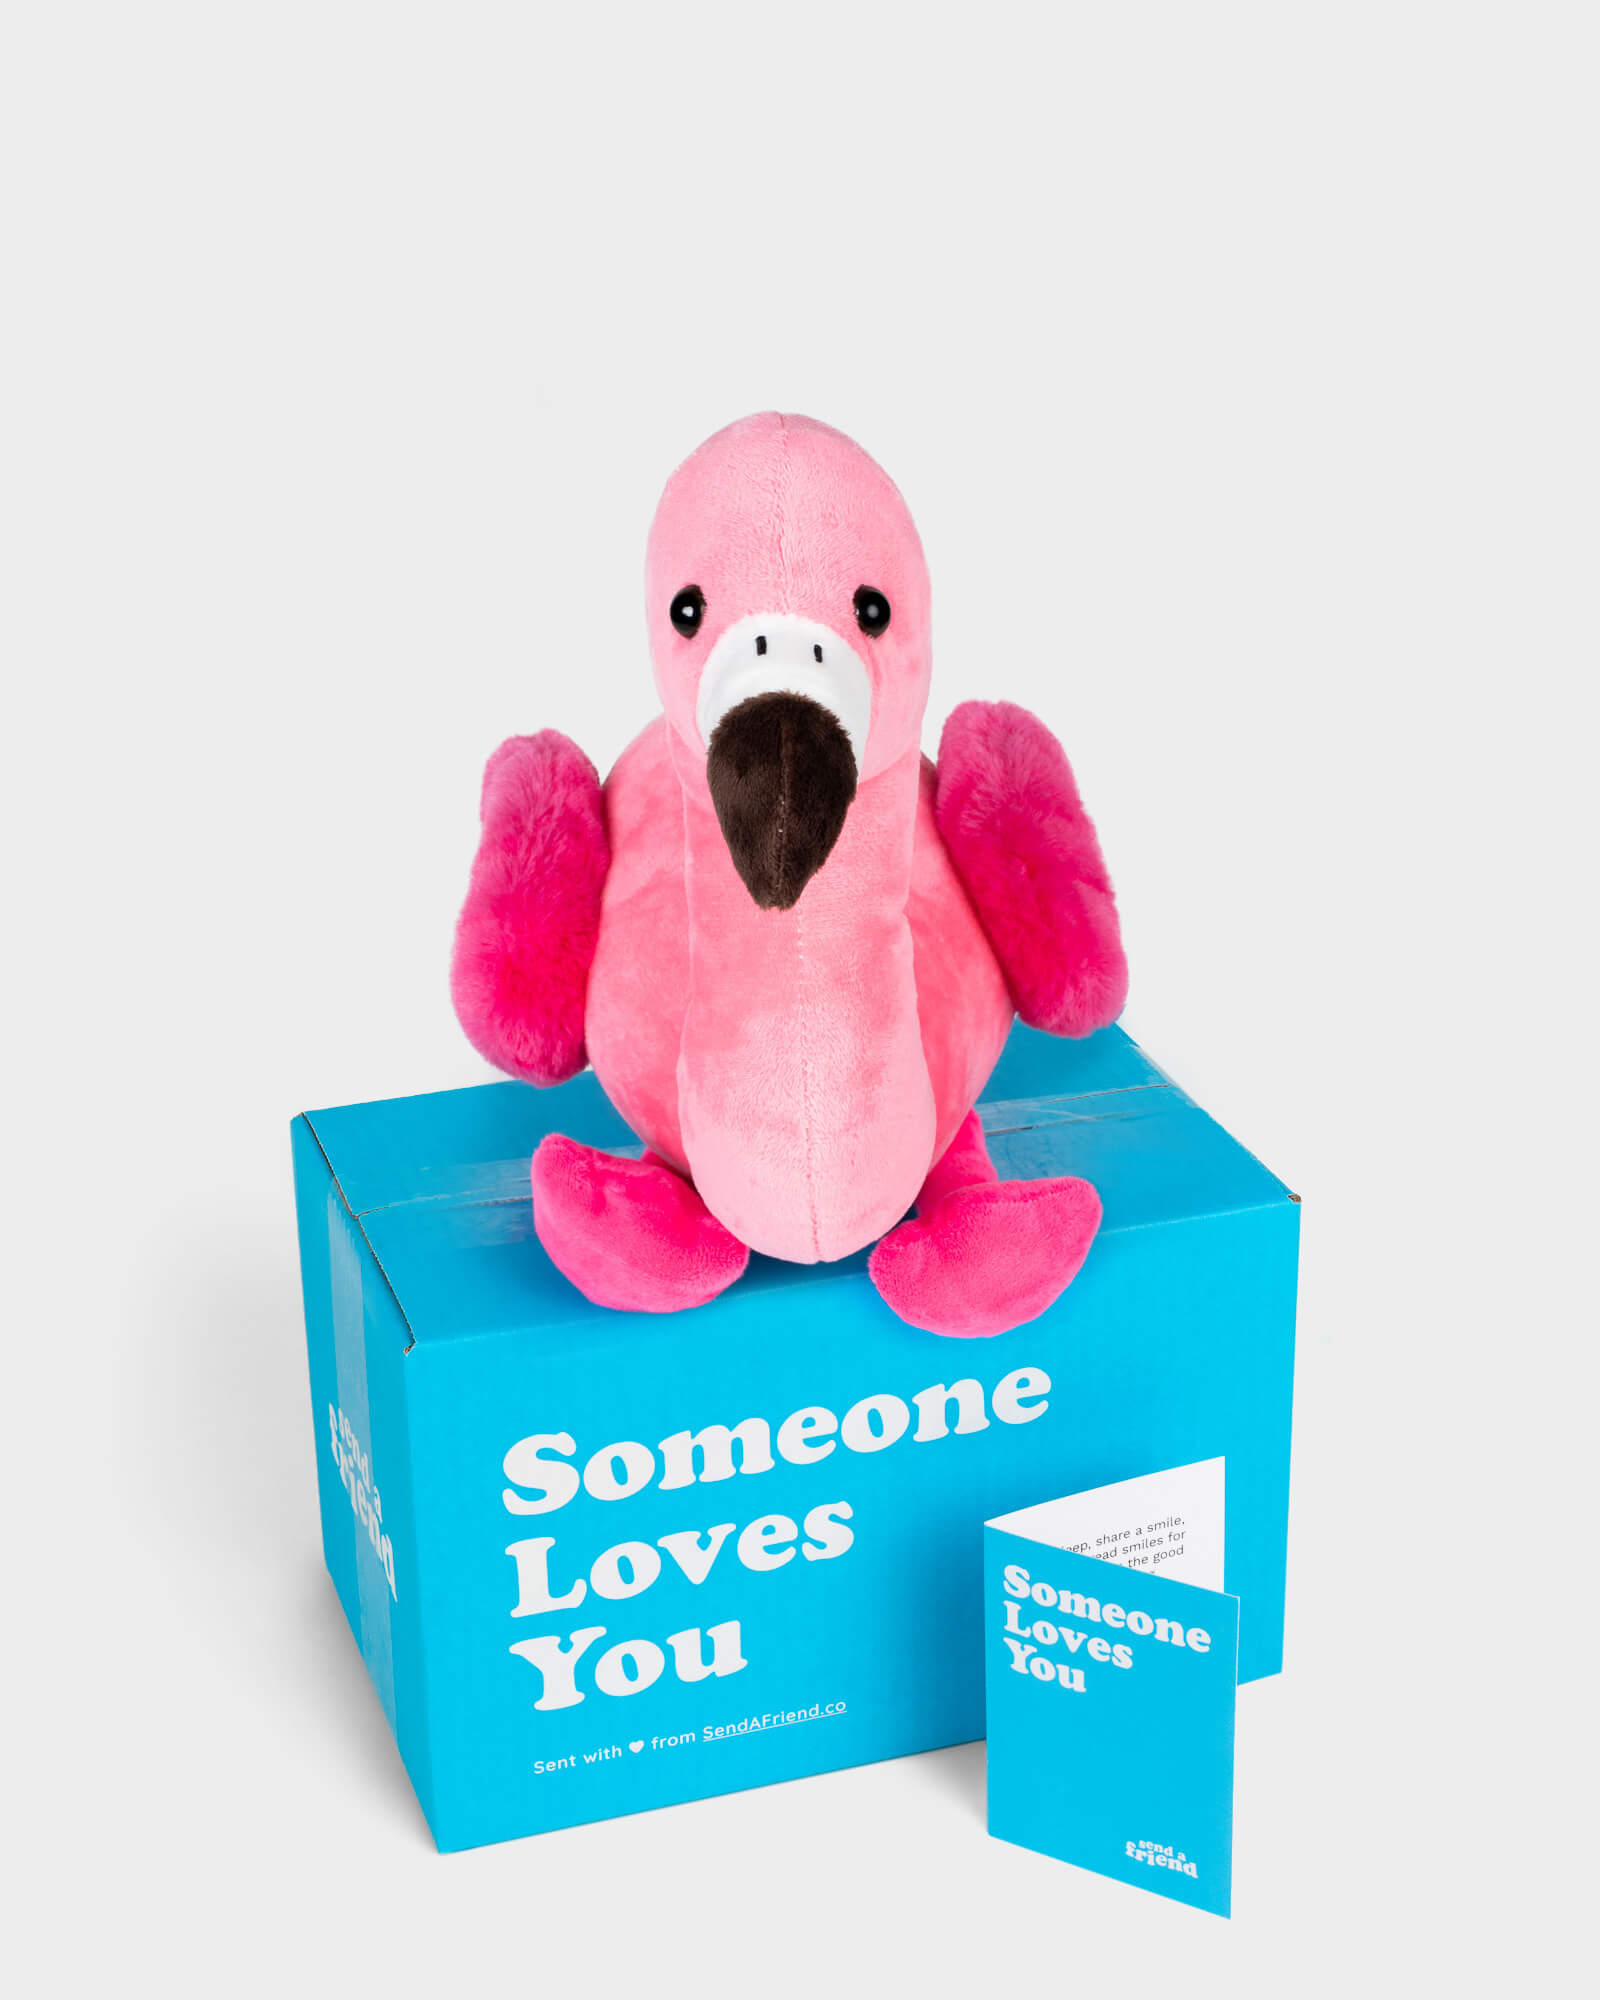 Front view photo of pink Faye the Flamingo, Someone Loves You box, and note card